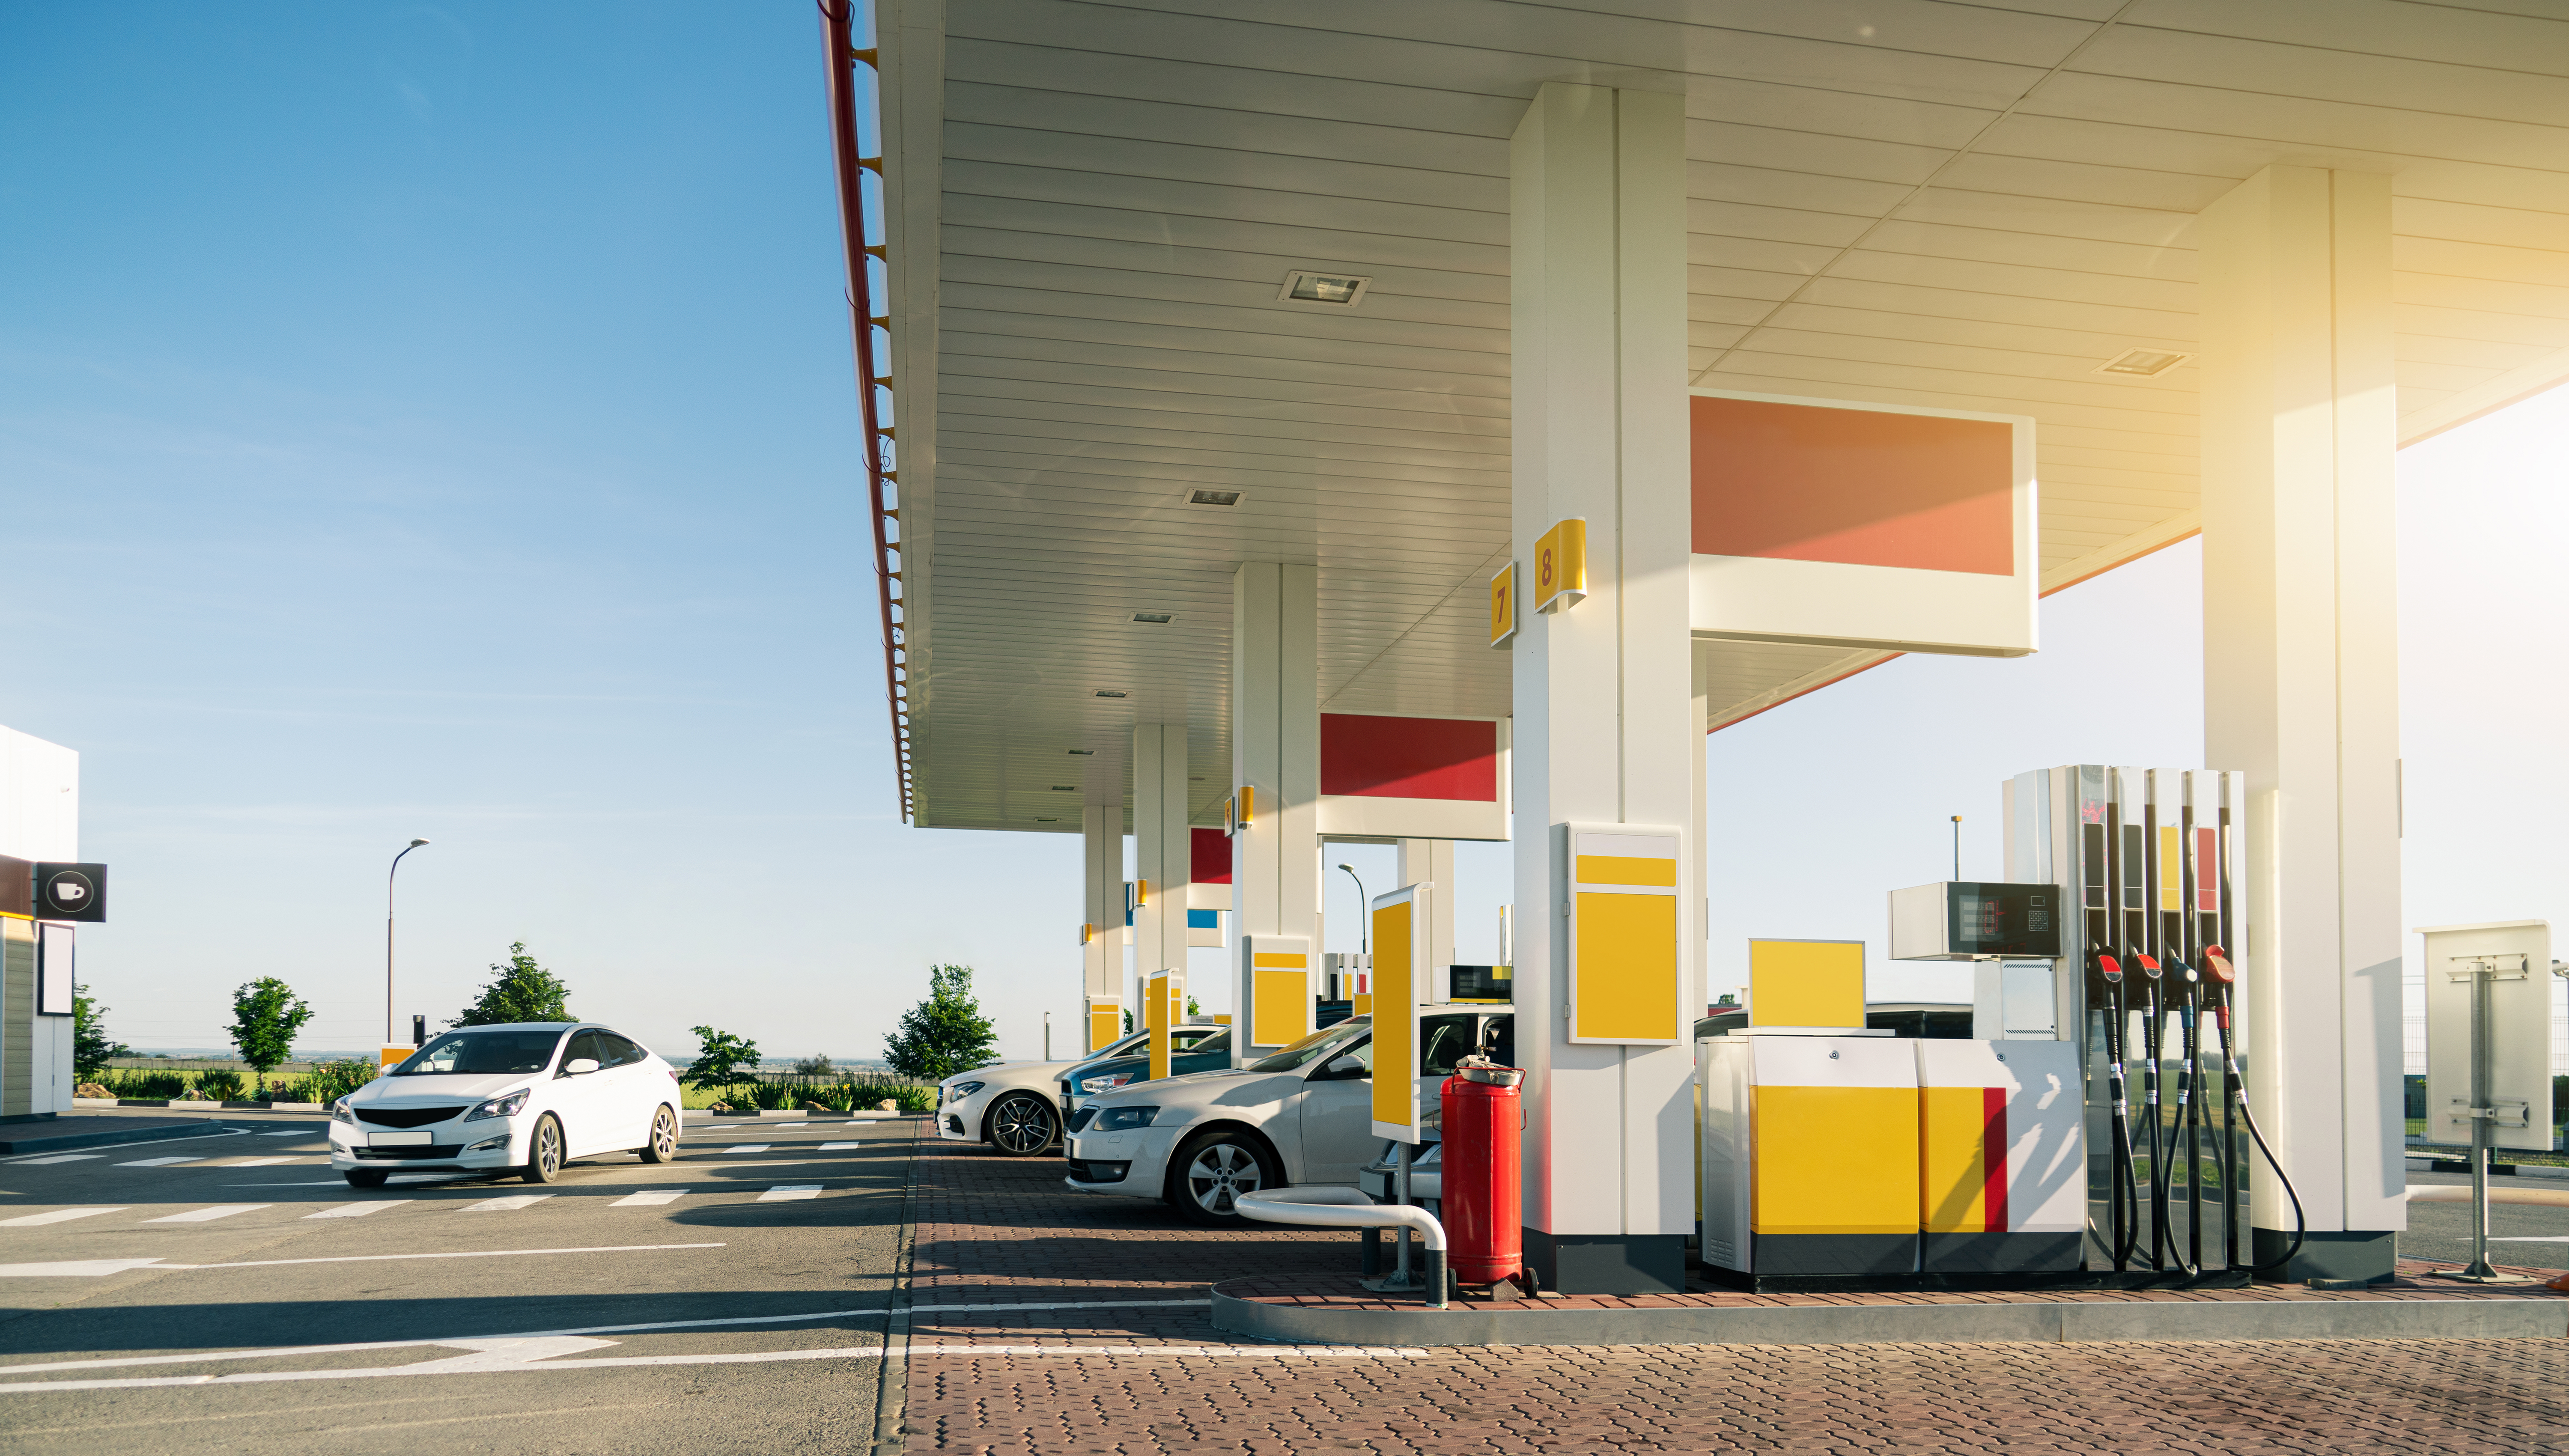 Gas station on the highway. | Source: Shutterstock